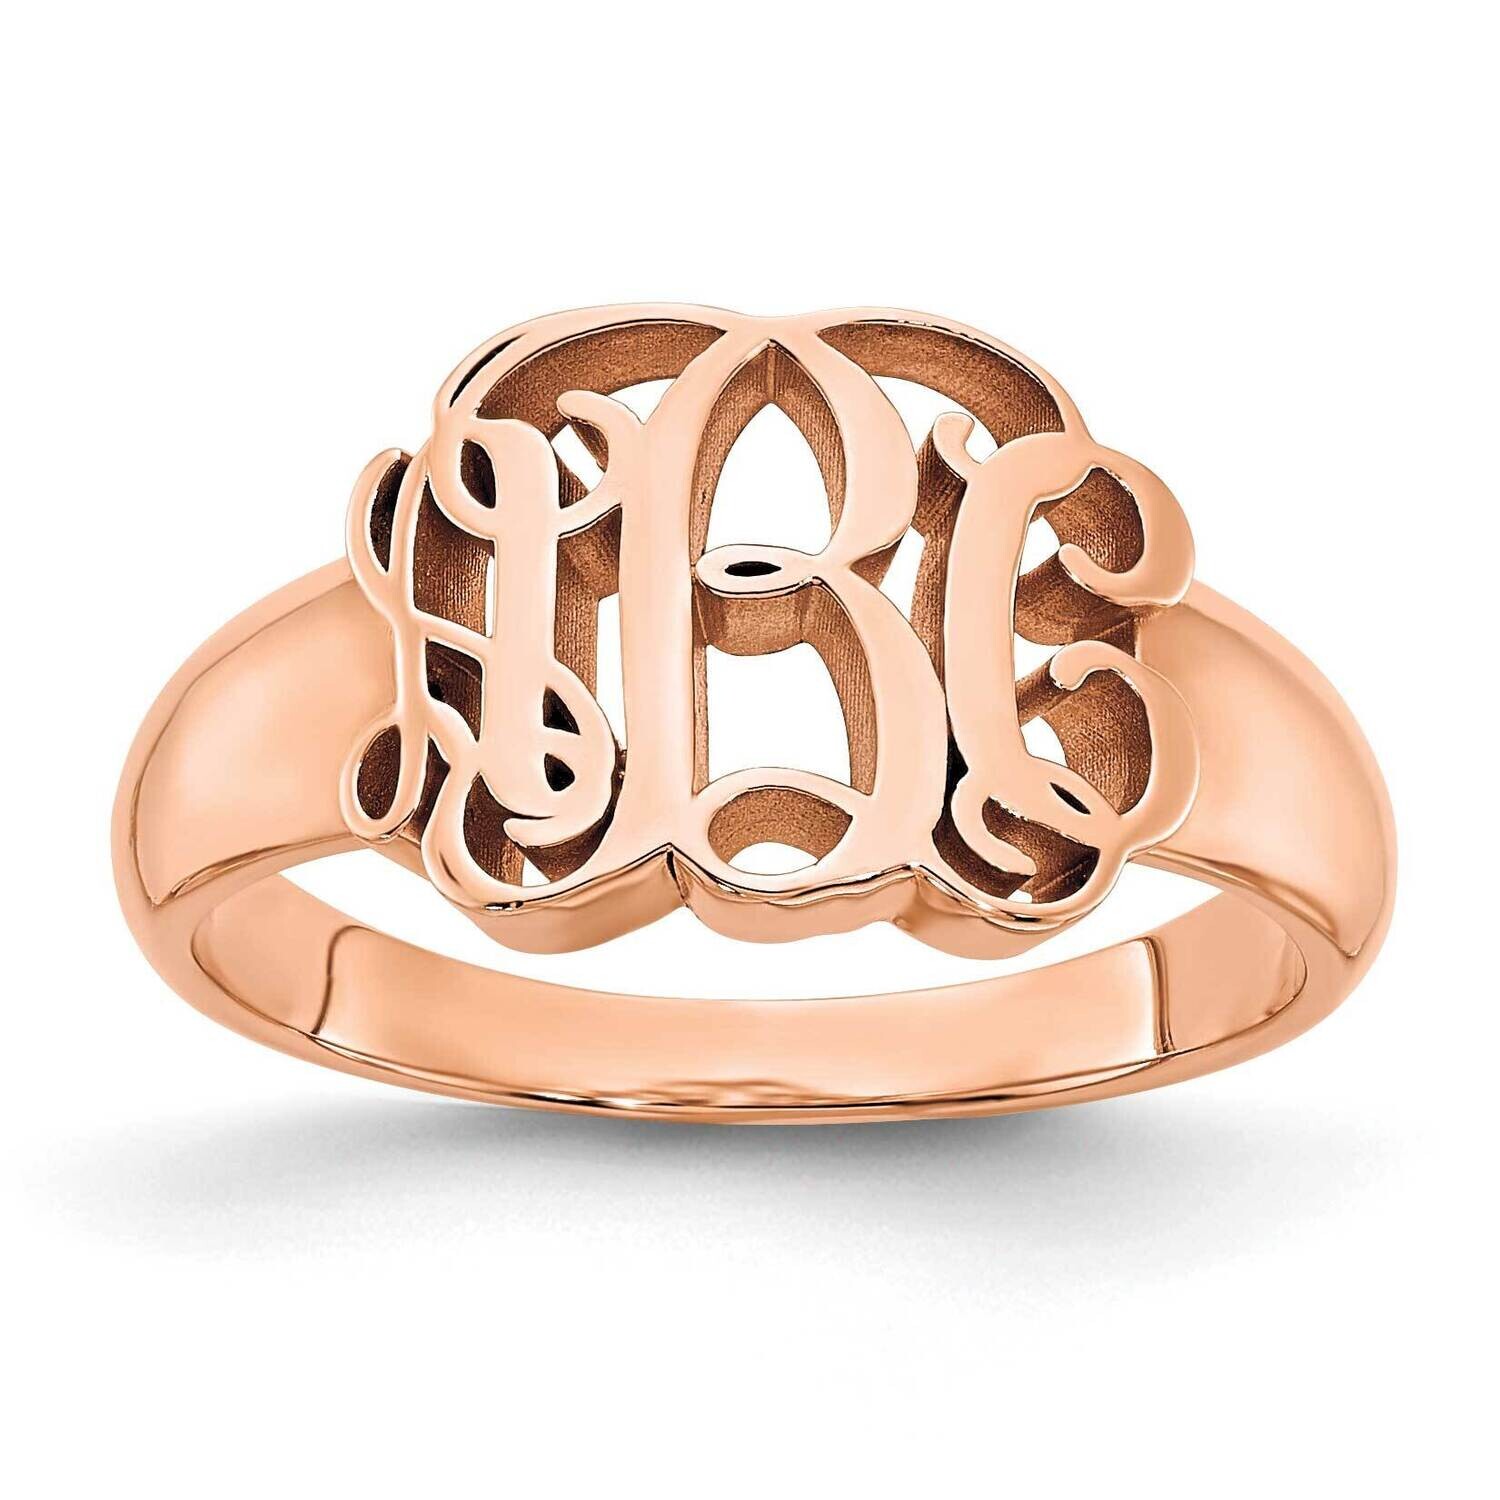 Rose-Plated Monogram Signet Ring Sterling Silver XNR51RP